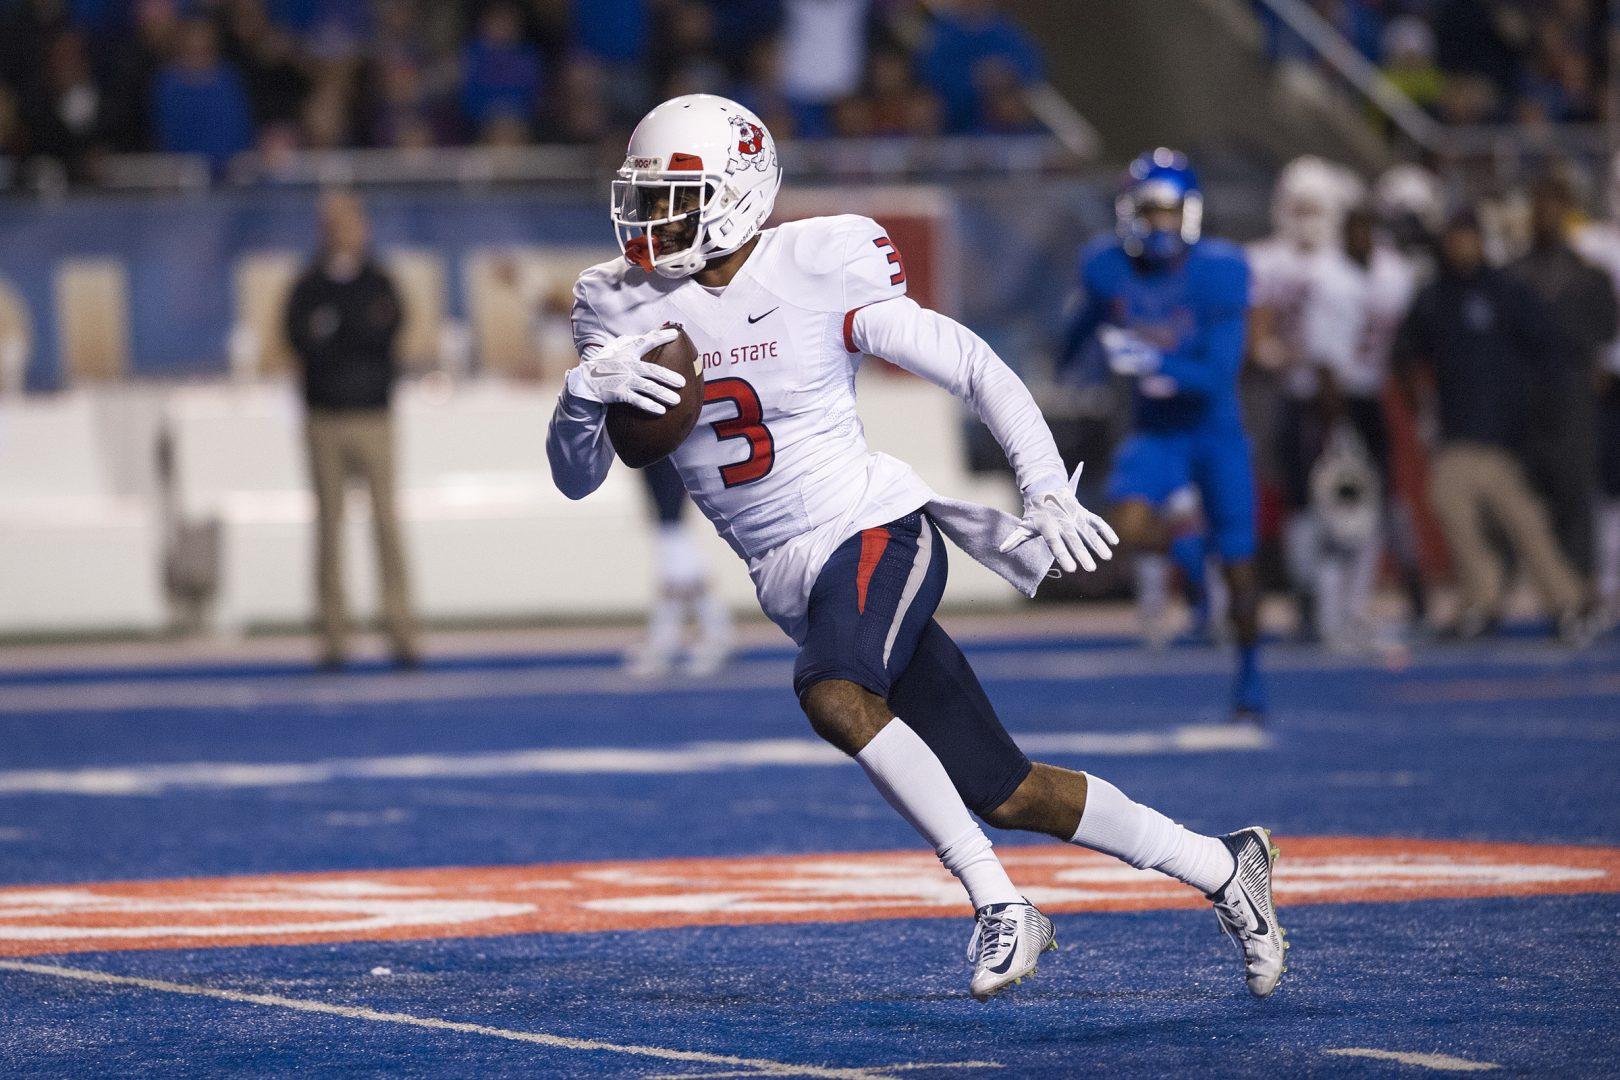 Fresno State wide receiver Josh Harper sprints after receiving a pass at Albertsons Stadium in Boise, Idaho, during the Dogs 28-14 loss to the Broncos on Saturday. (Photo courtesy of NCAA Photos)